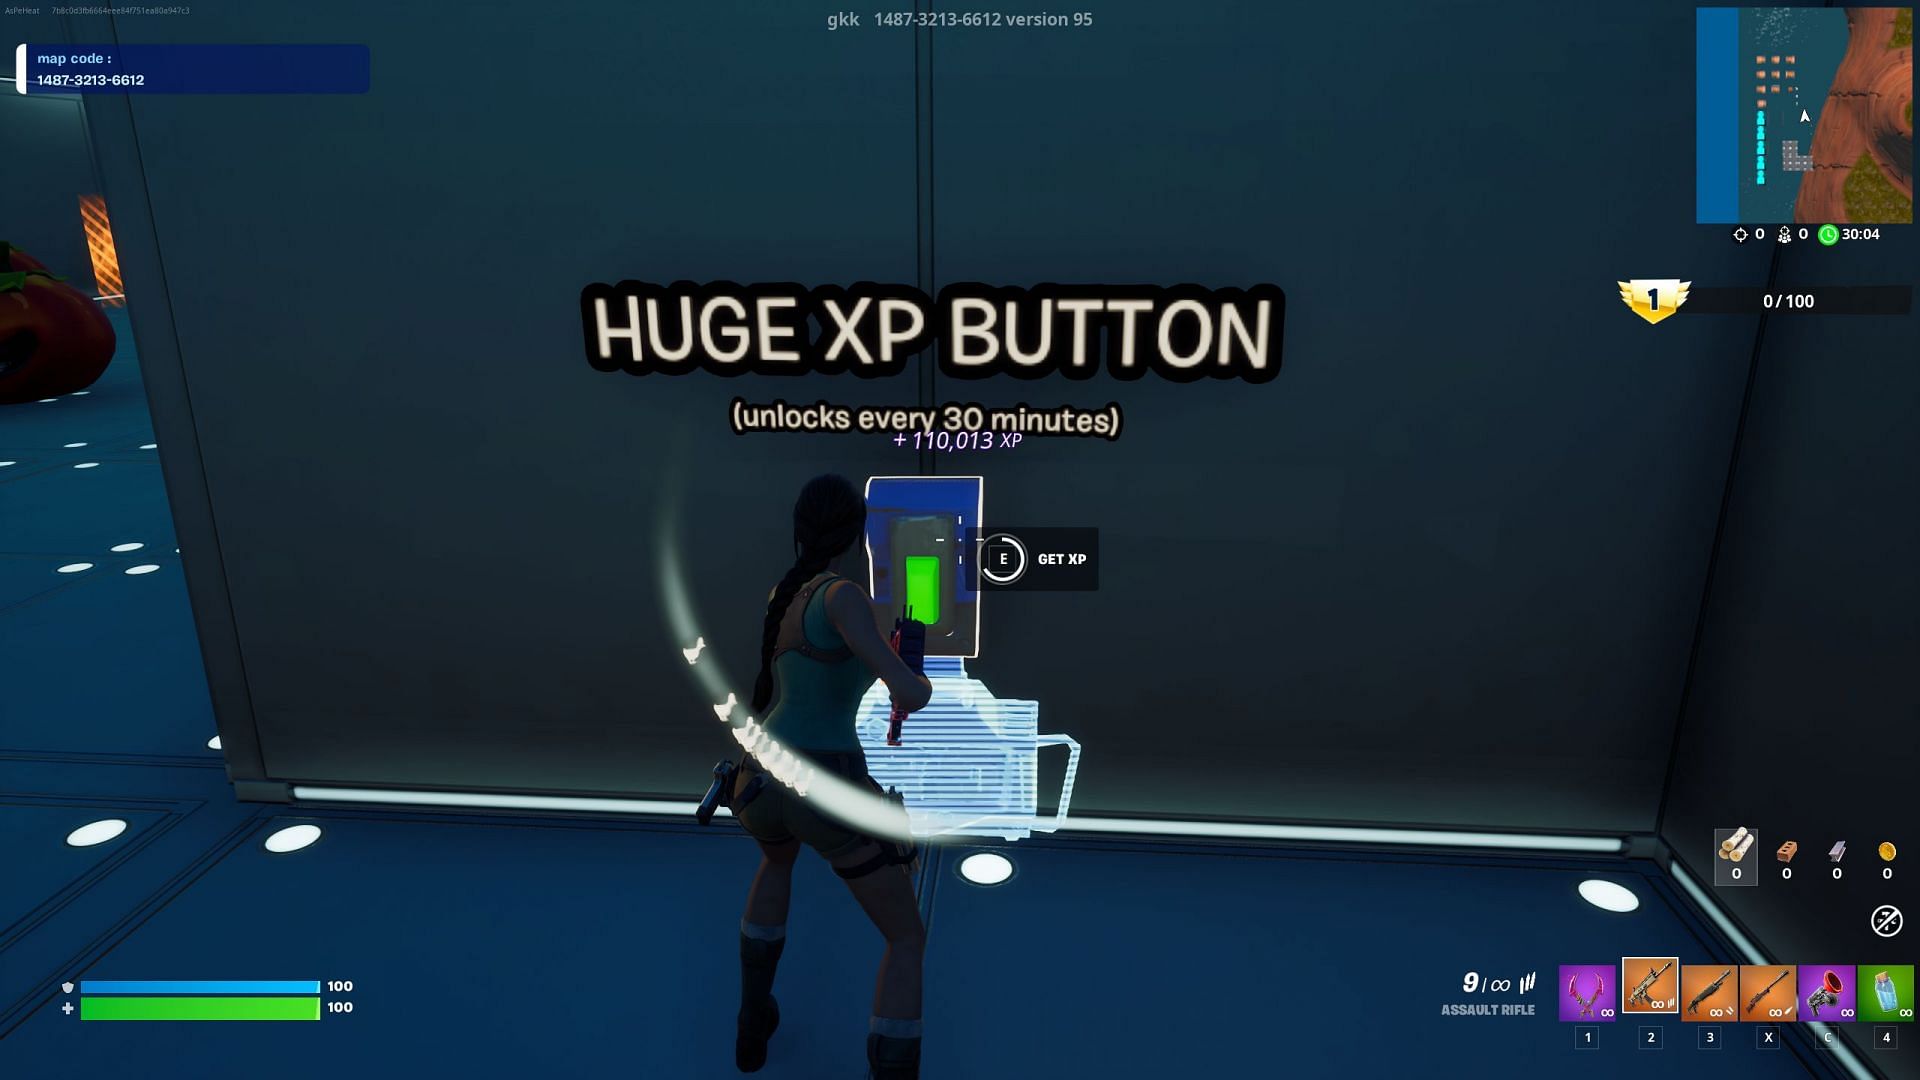 The Huge XP button can be used every 30 minutes (Image via Epic Games)